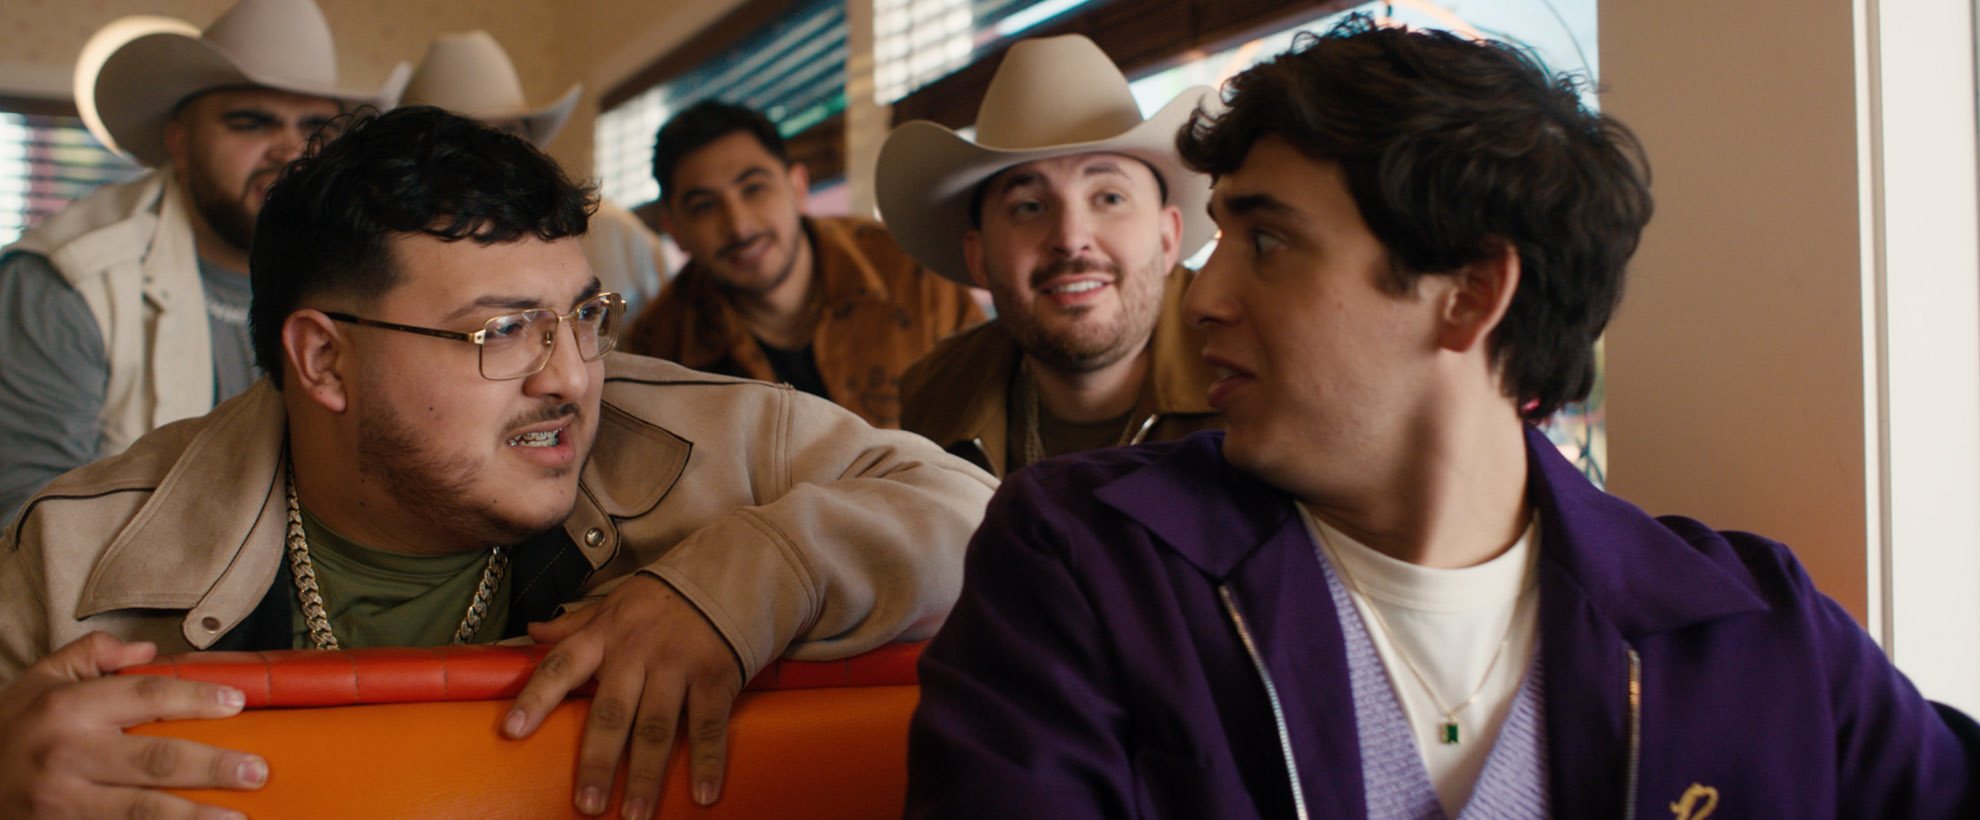 Marcello Hernández and Grupo Frontera in a diner booth